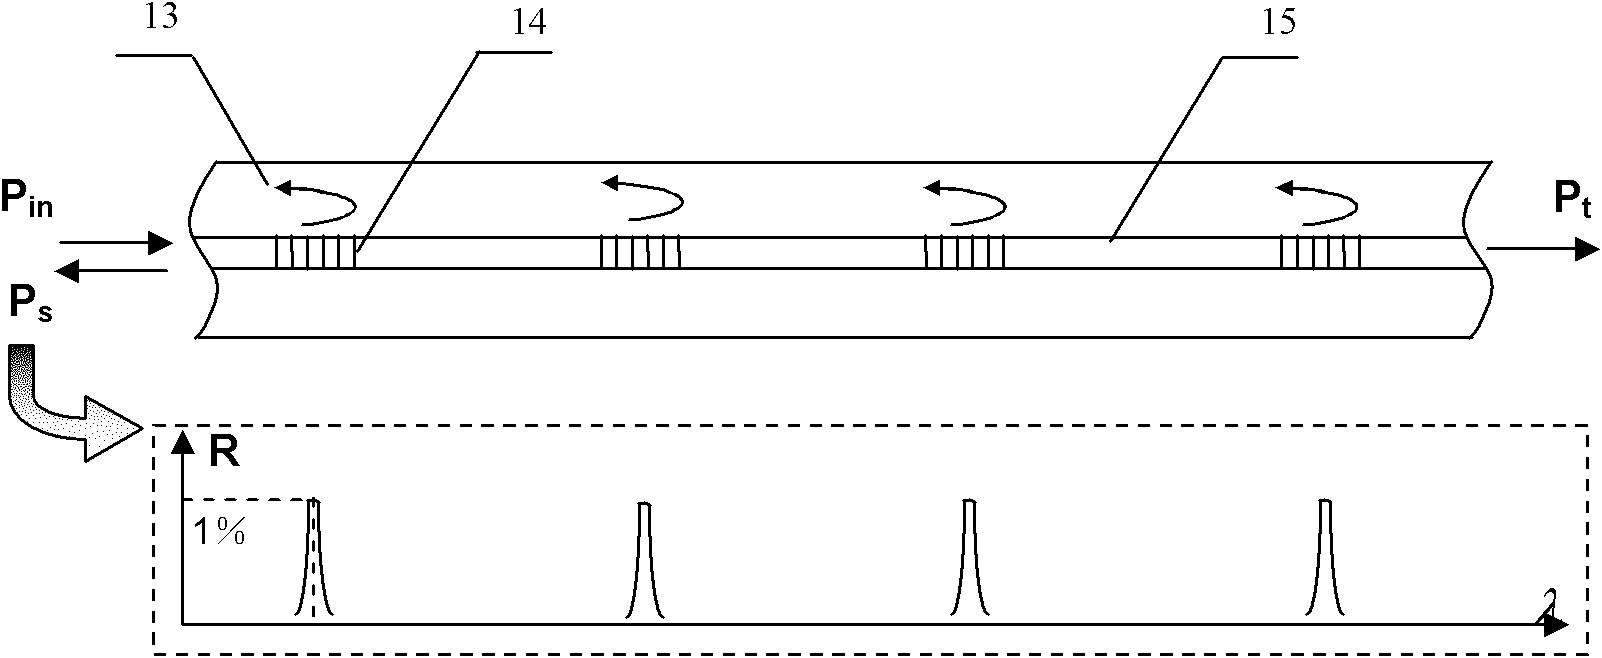 Distributed sensing system based on weak Bragg reflection structure